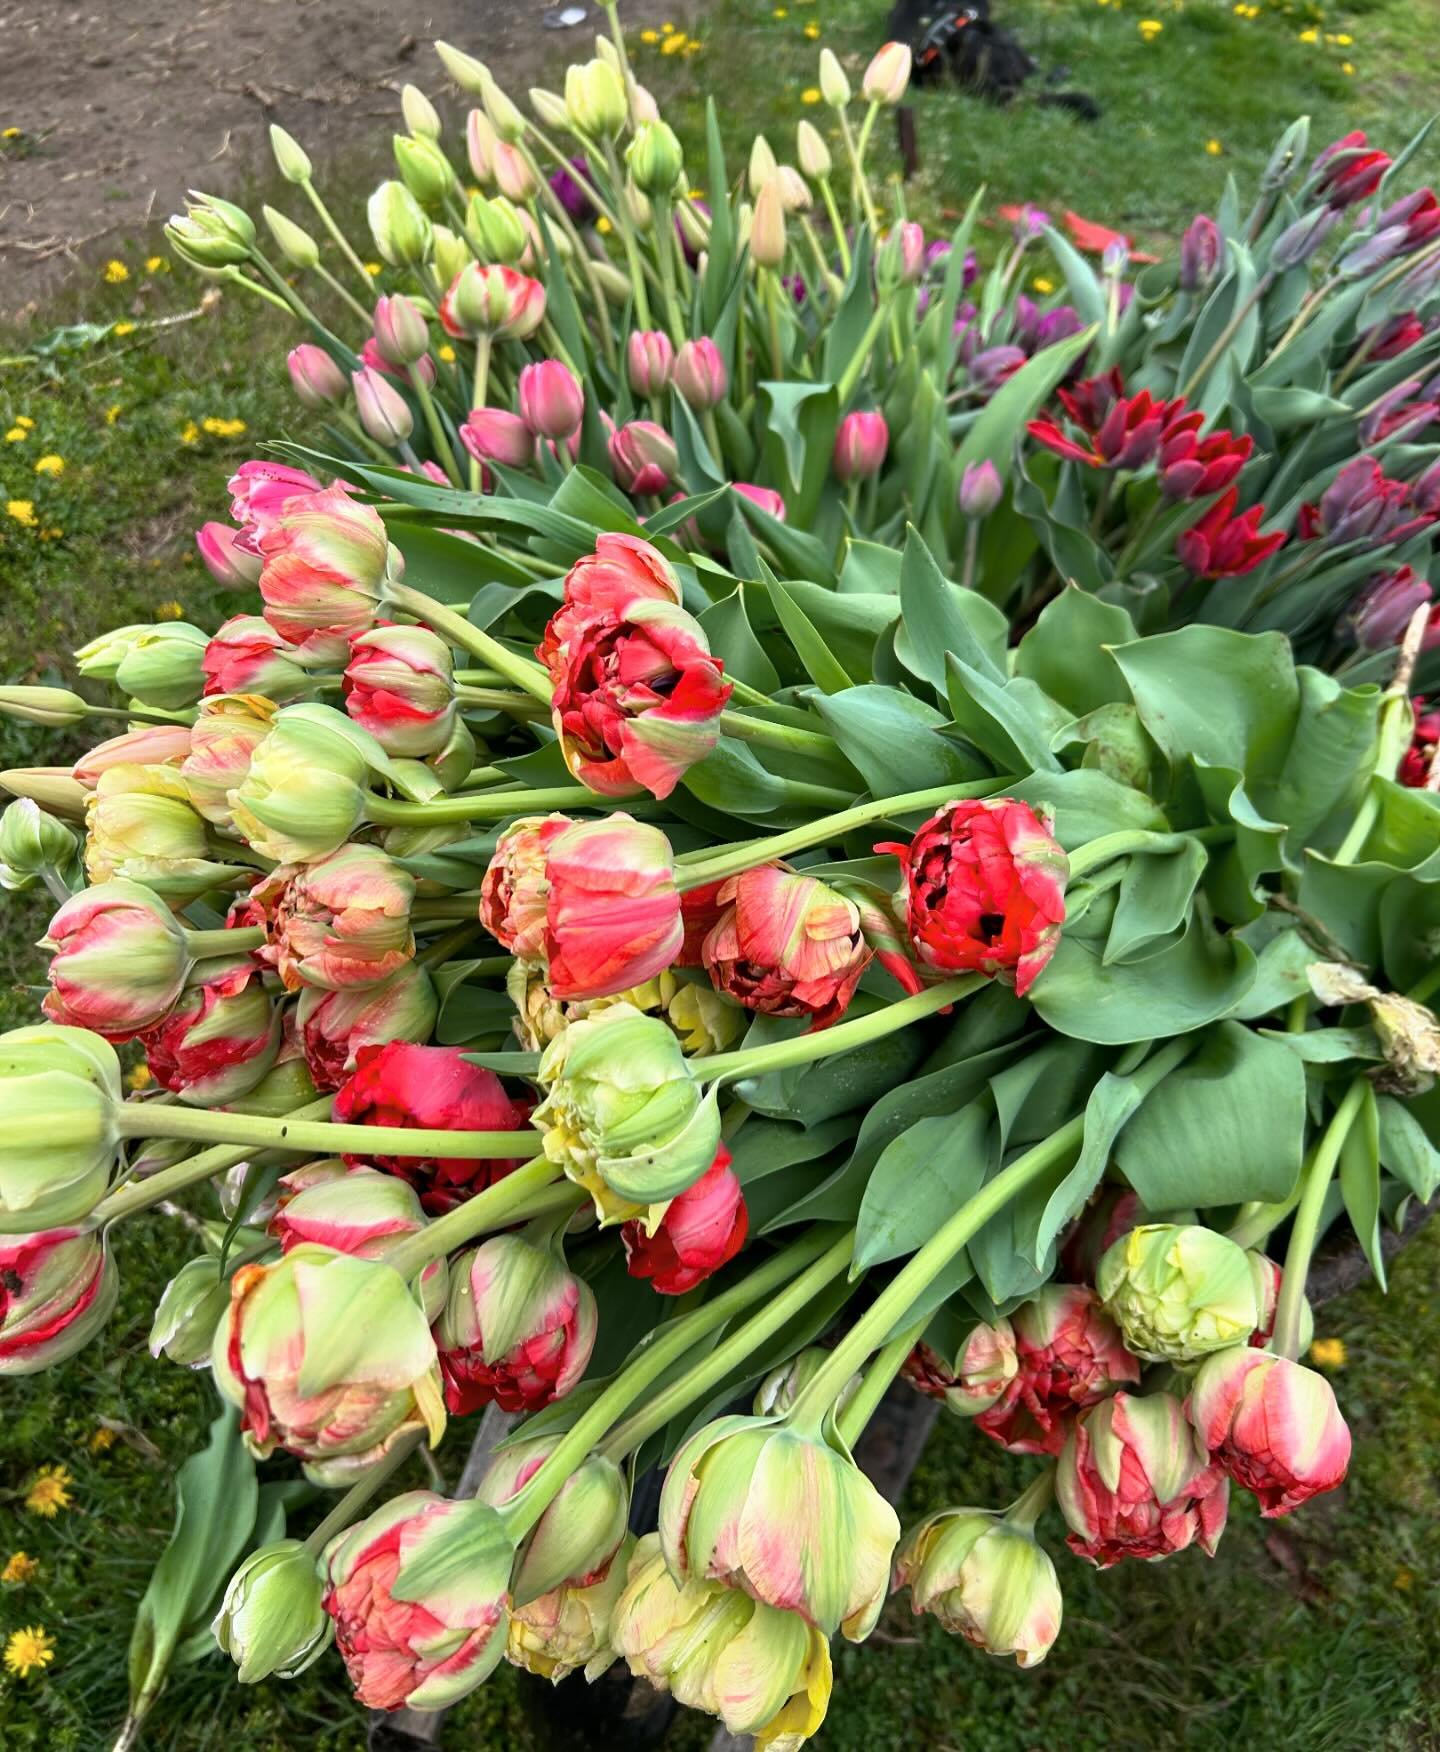 Tulip season came in hot this year. Crazy to think we&rsquo;ve harvested almost 6,000 stems in 2 weeks.

The cooler is full and now we stock the stand and prep for Mother&rsquo;s Day.

🌸Farm Stand will be open Thursday-Sunday this week

🌸You can st